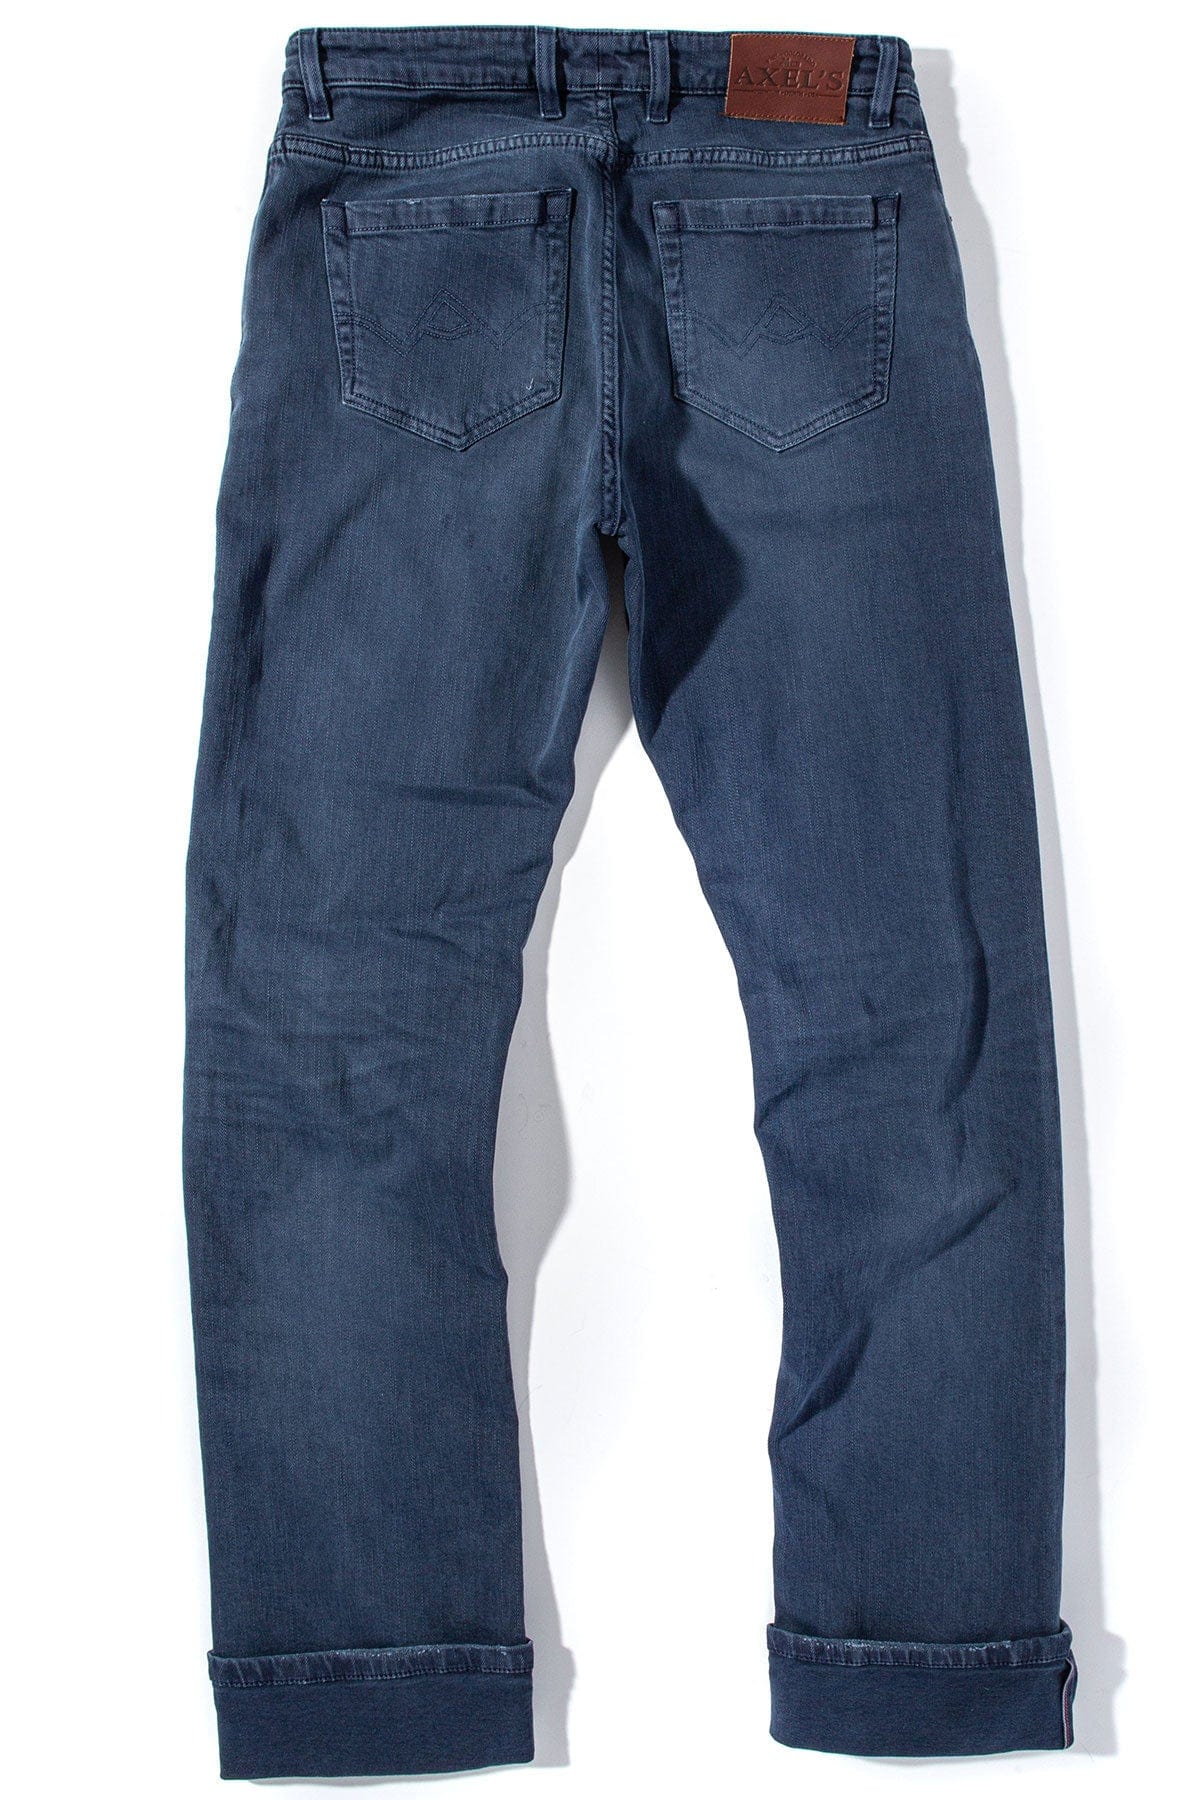 AXEL JEANS LIGHT BLUE – FAYT The Label